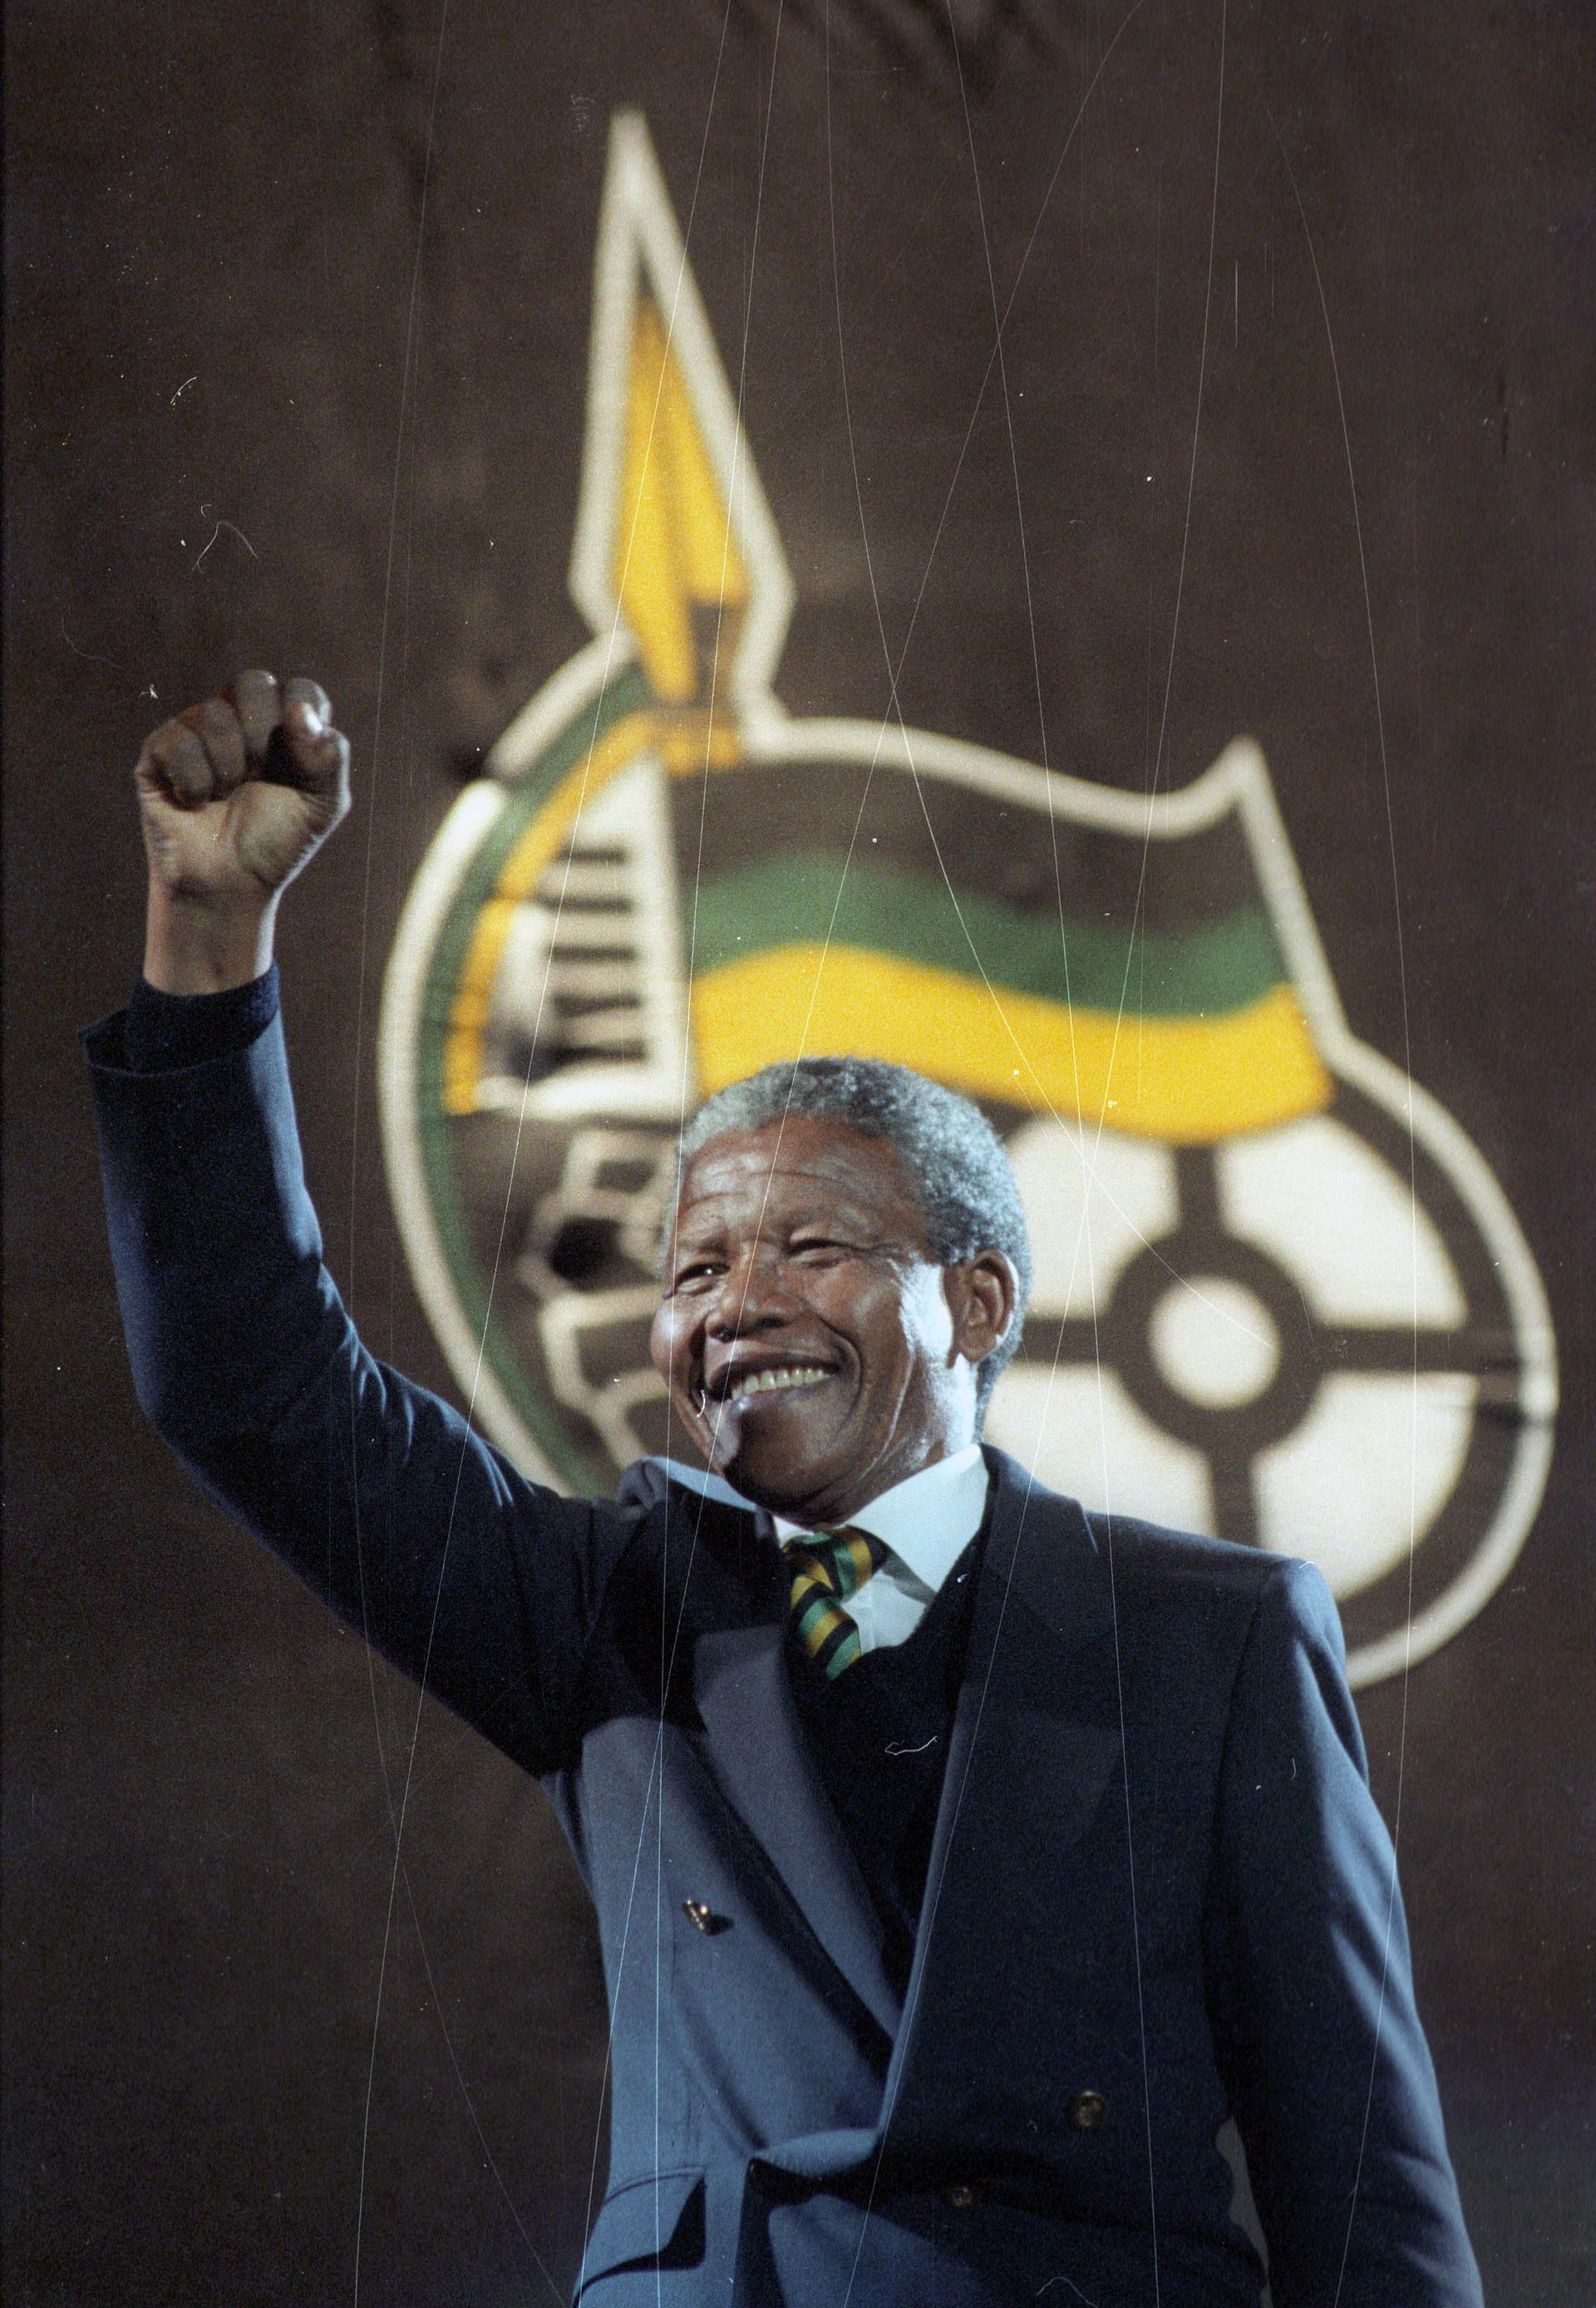 Nelson Mandela raises his fist as he walks on stage at Wembley Arena in London April 16, 1990. Mandela topped the bill at a rock concert in his honor. The sell-out concert was beamed live by satellite to about a dozen countries.